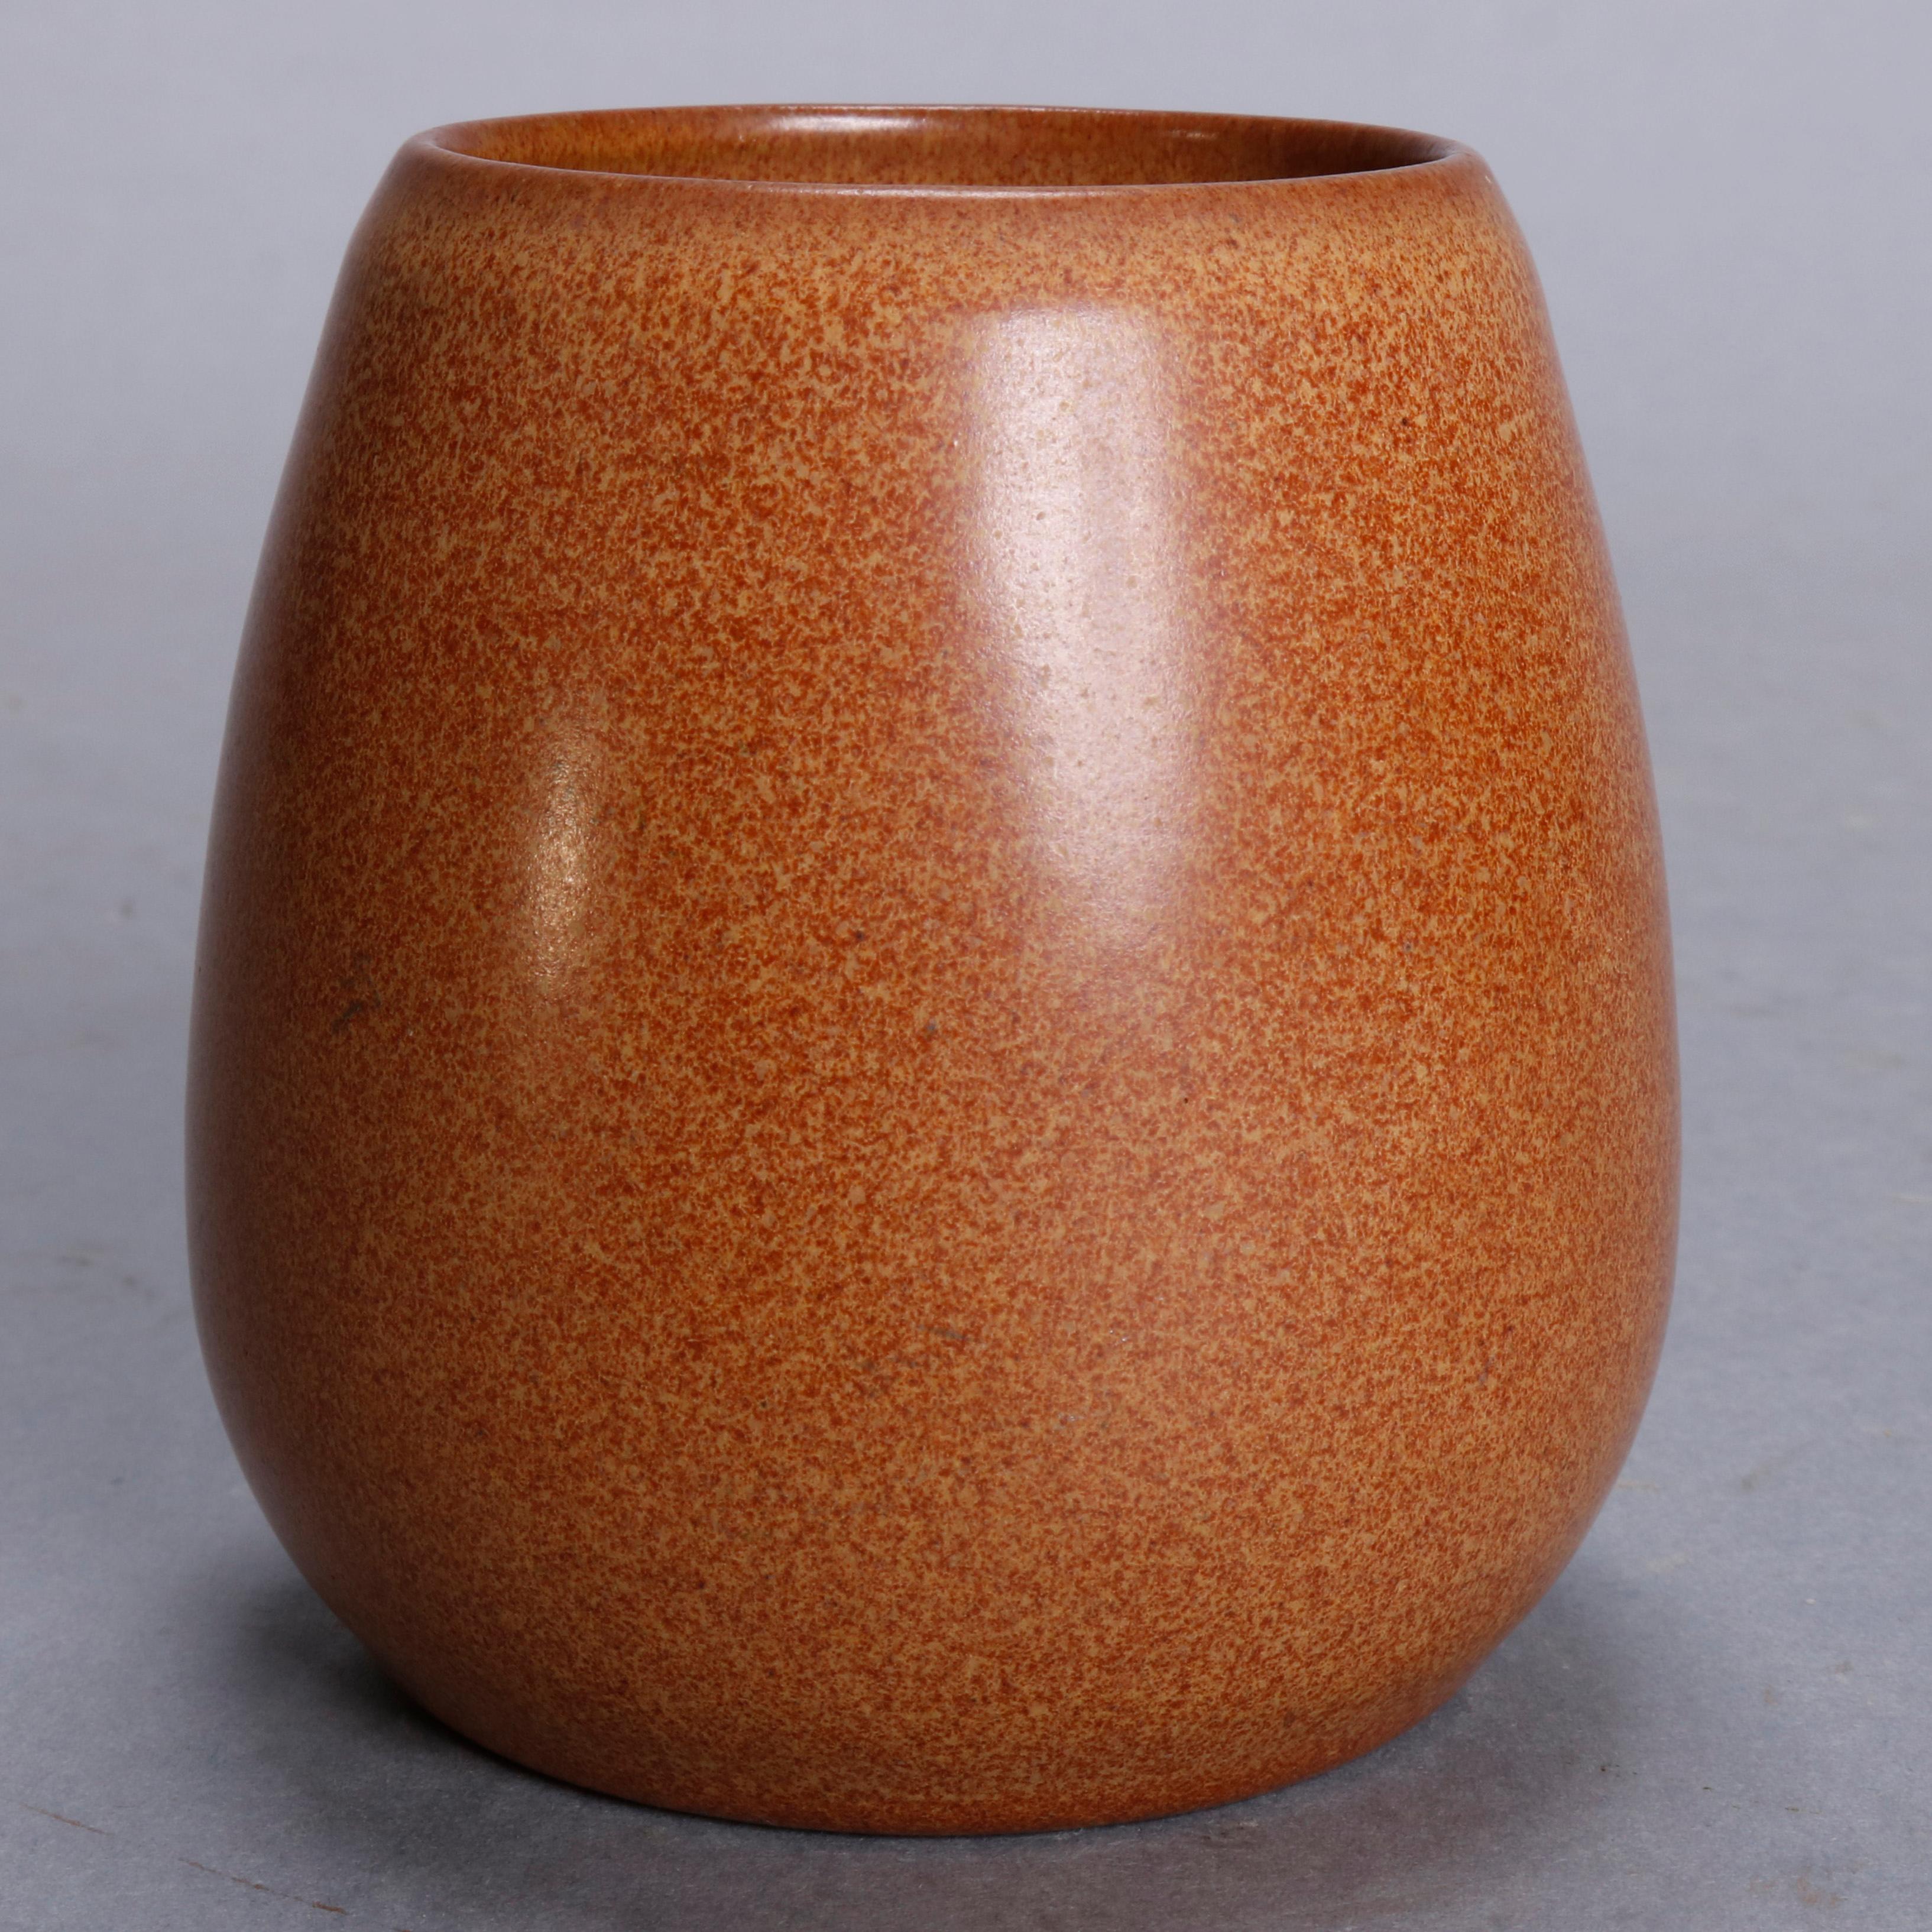 An Arts & Crafts art pottery vase by Marblehead offers avocado form with speckled finish, circa 1910

Measures: 3.75